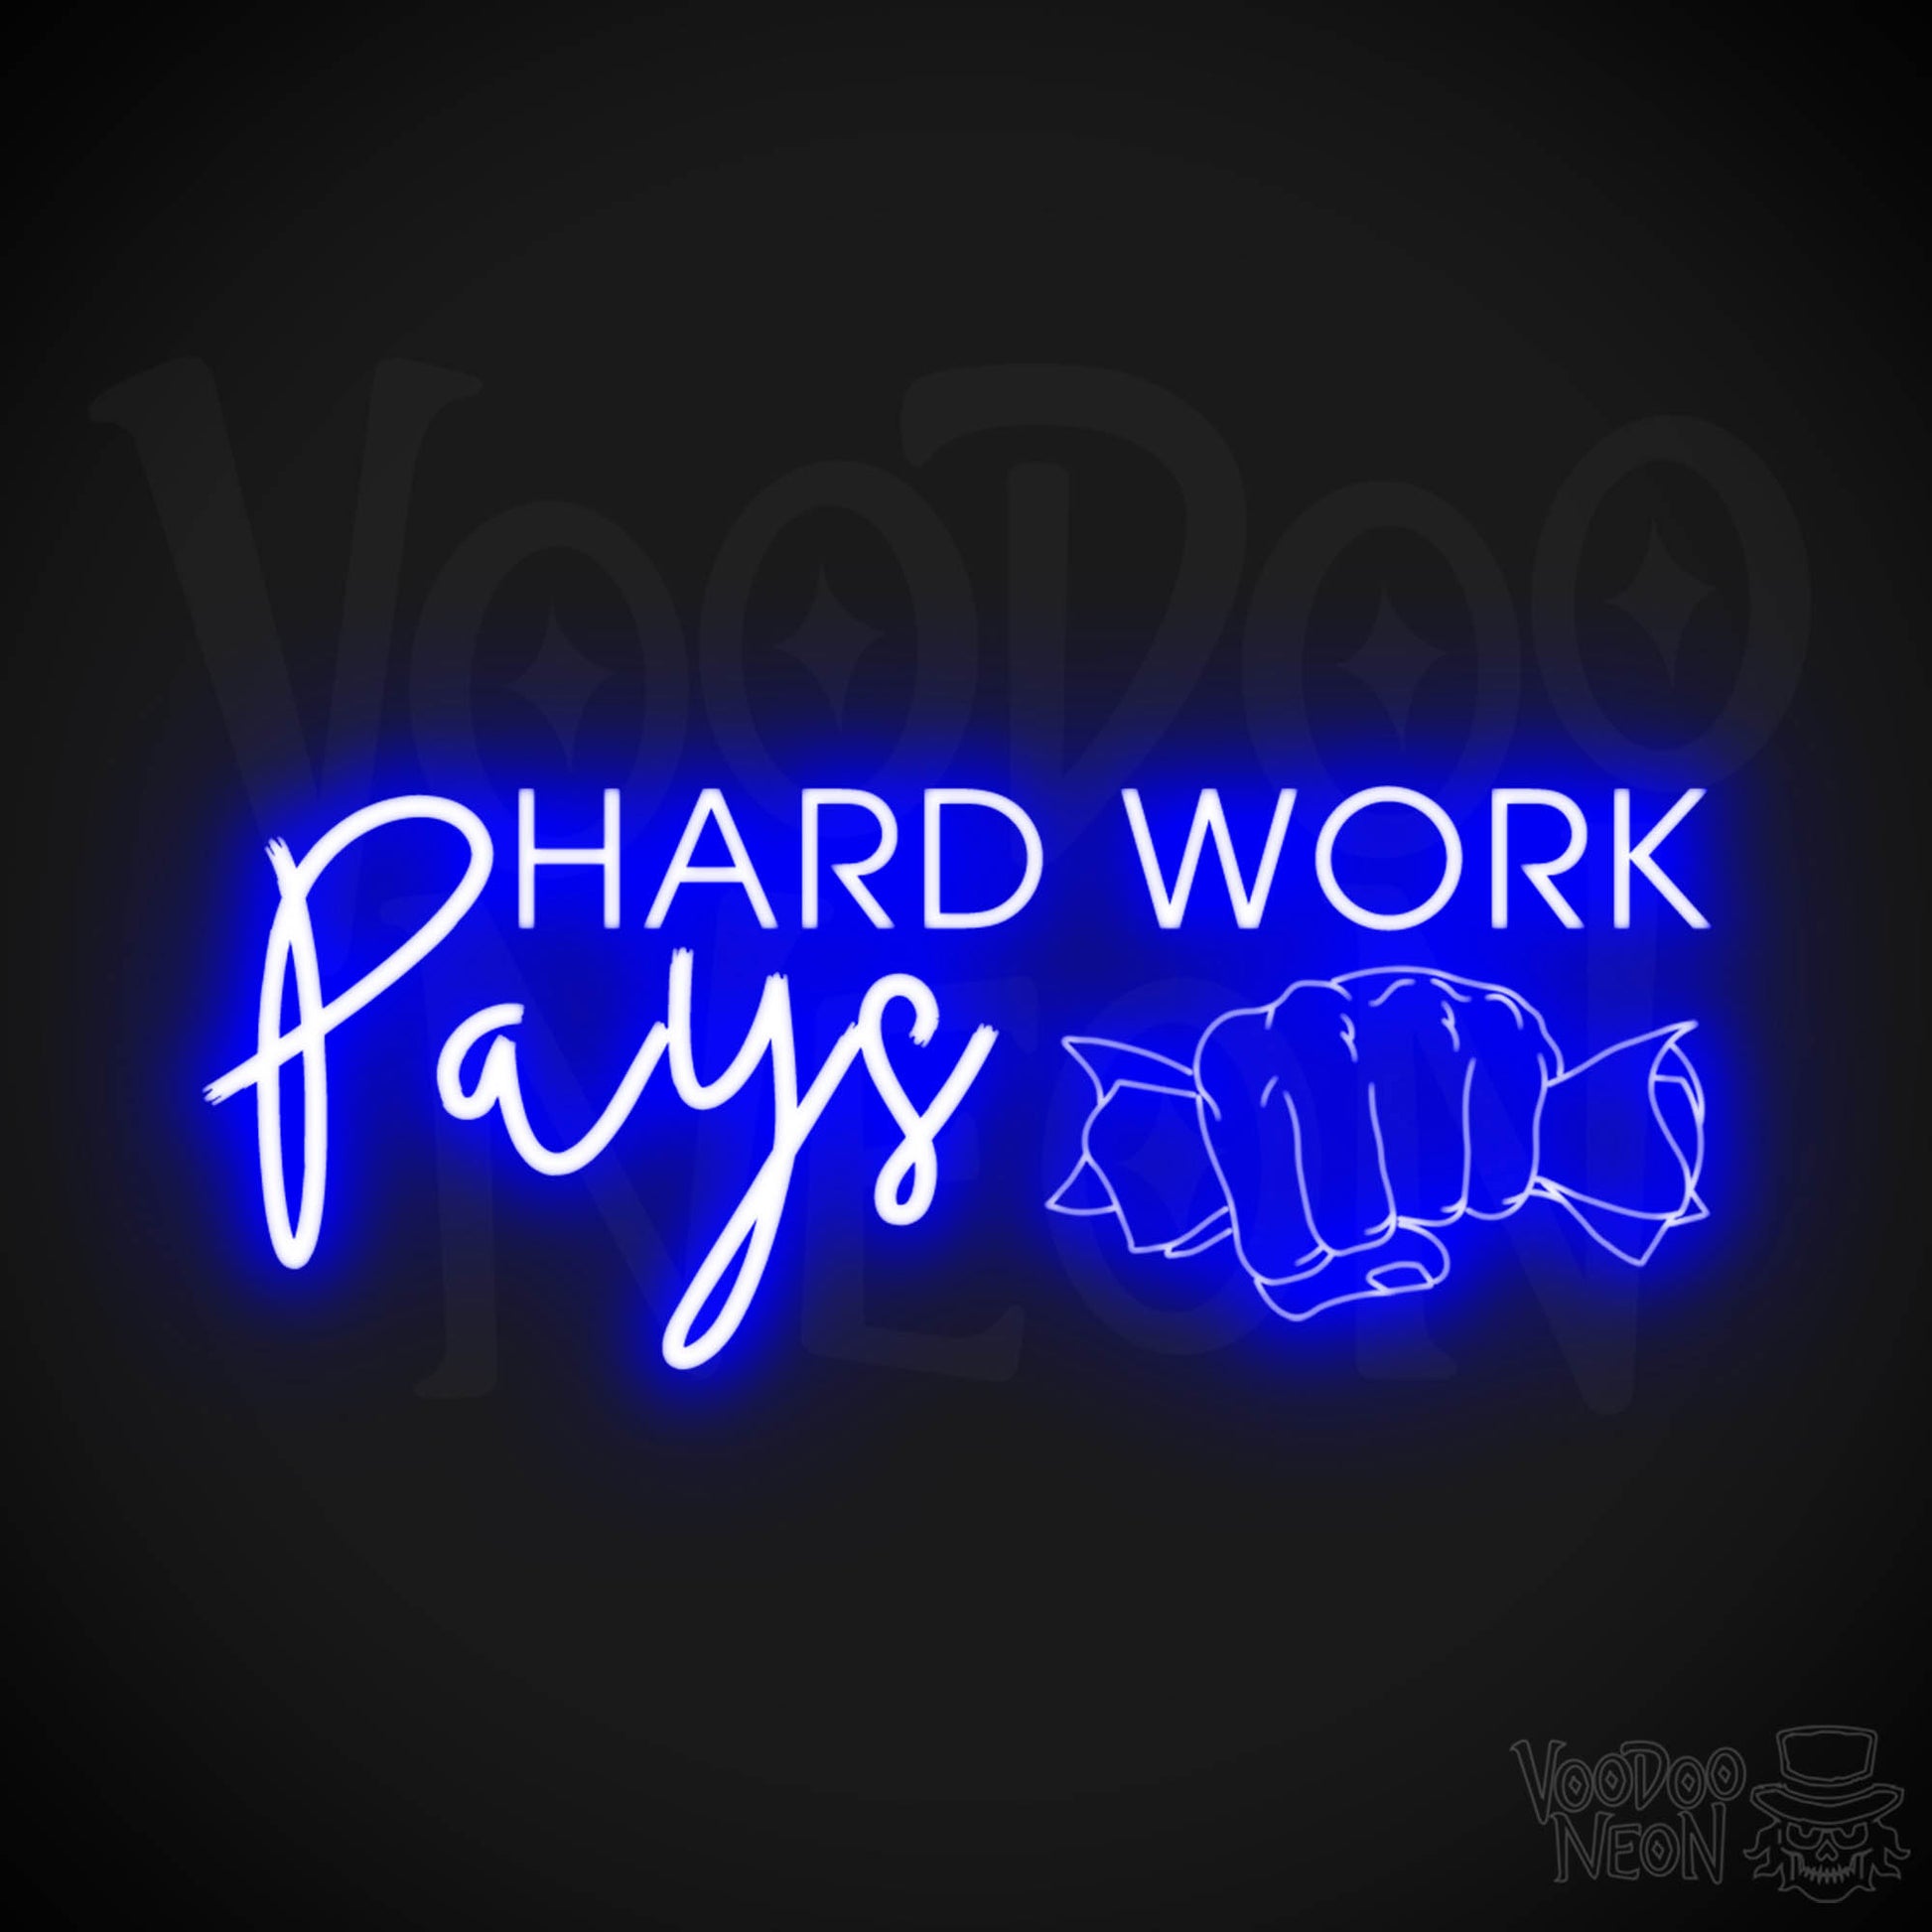 Hard Work Pays Neon Sign - LED Neon Wall Art - Color Dark Blue